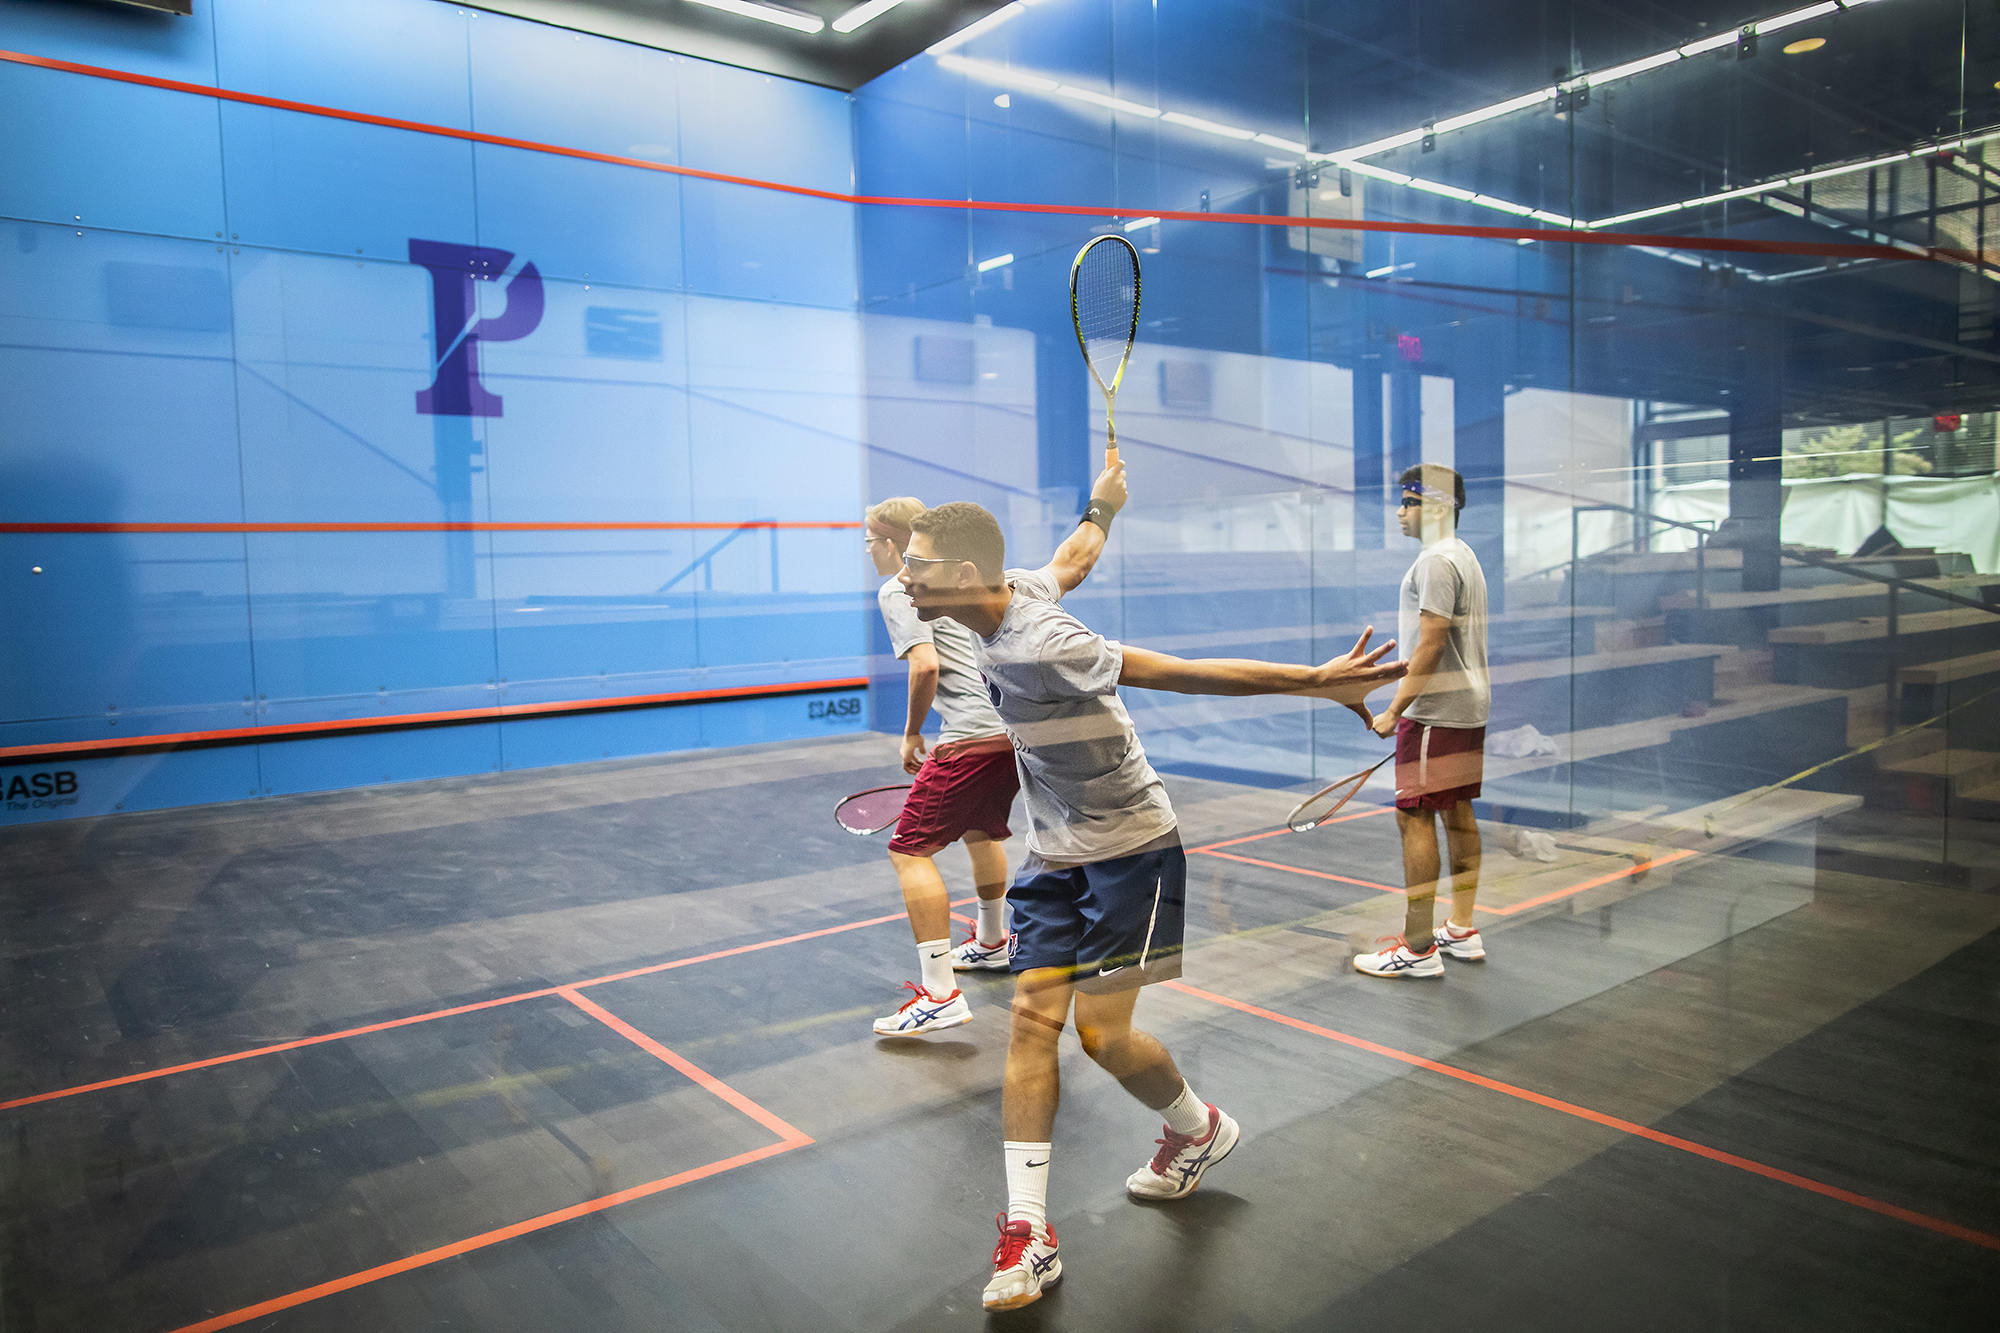 Male squash players play on the new glass courts at the new Penn Squash Center.